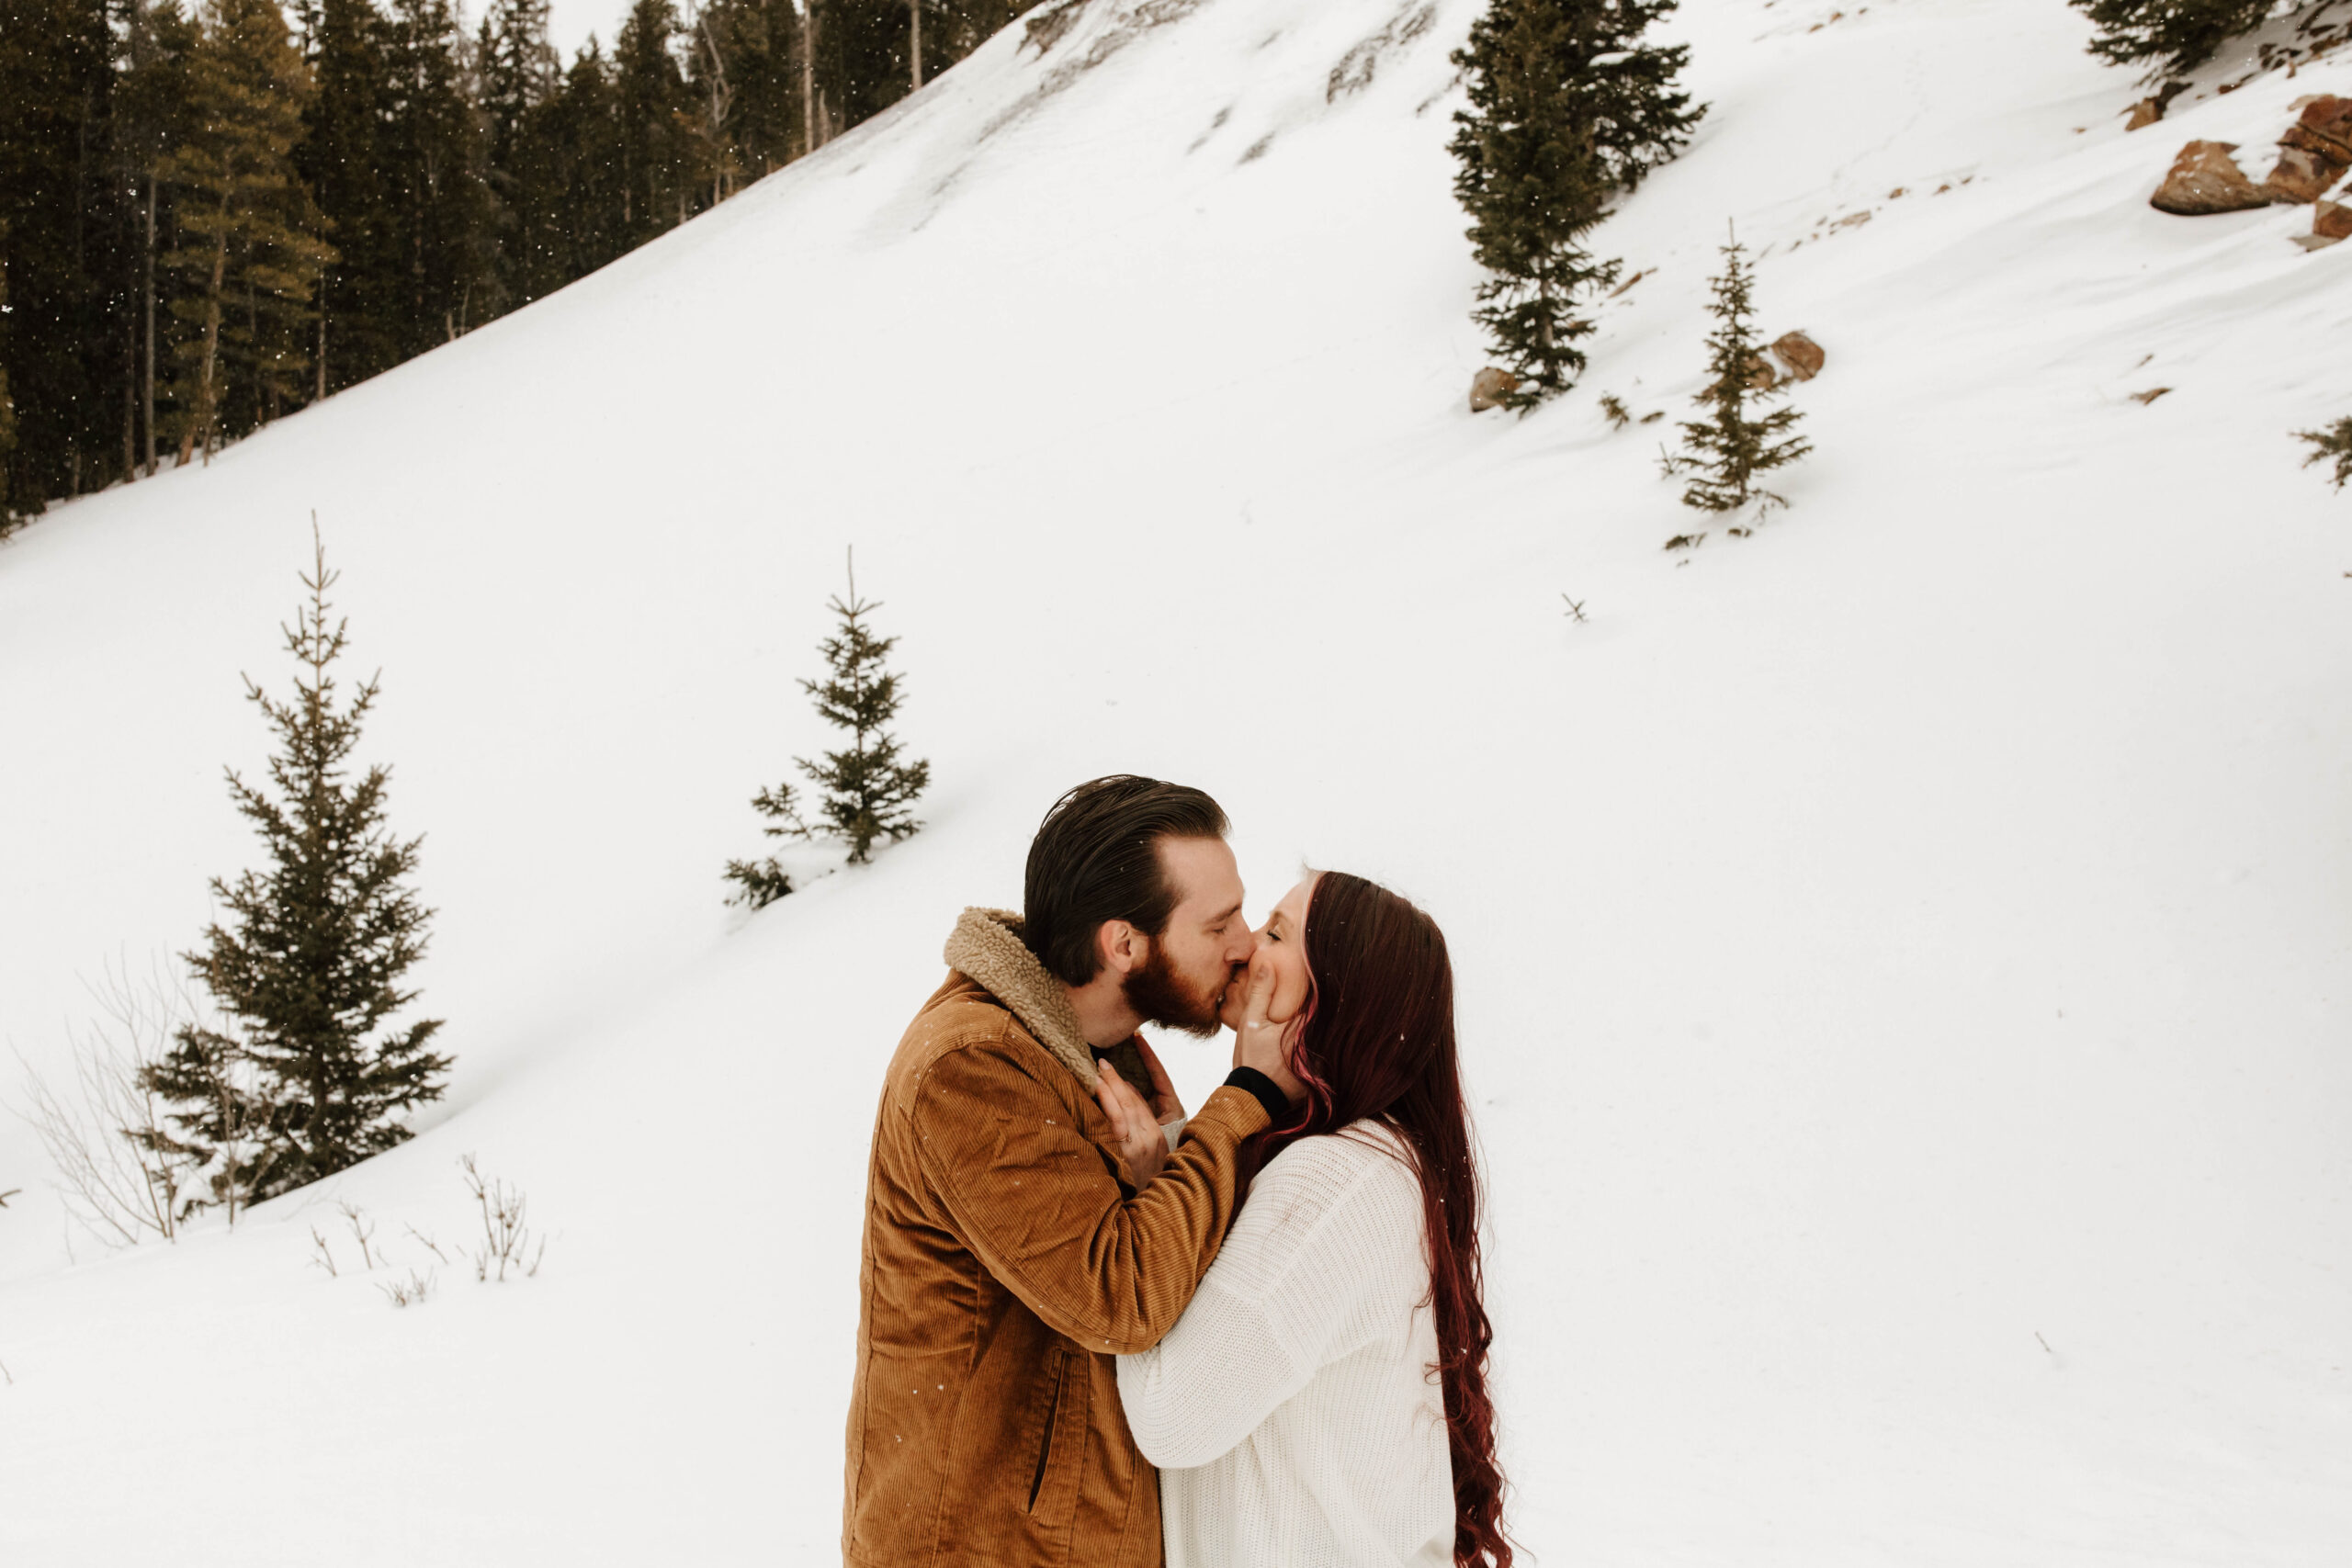 he grabs his fiancé's face and kisses her. they are surrounded by a mountain of snow
